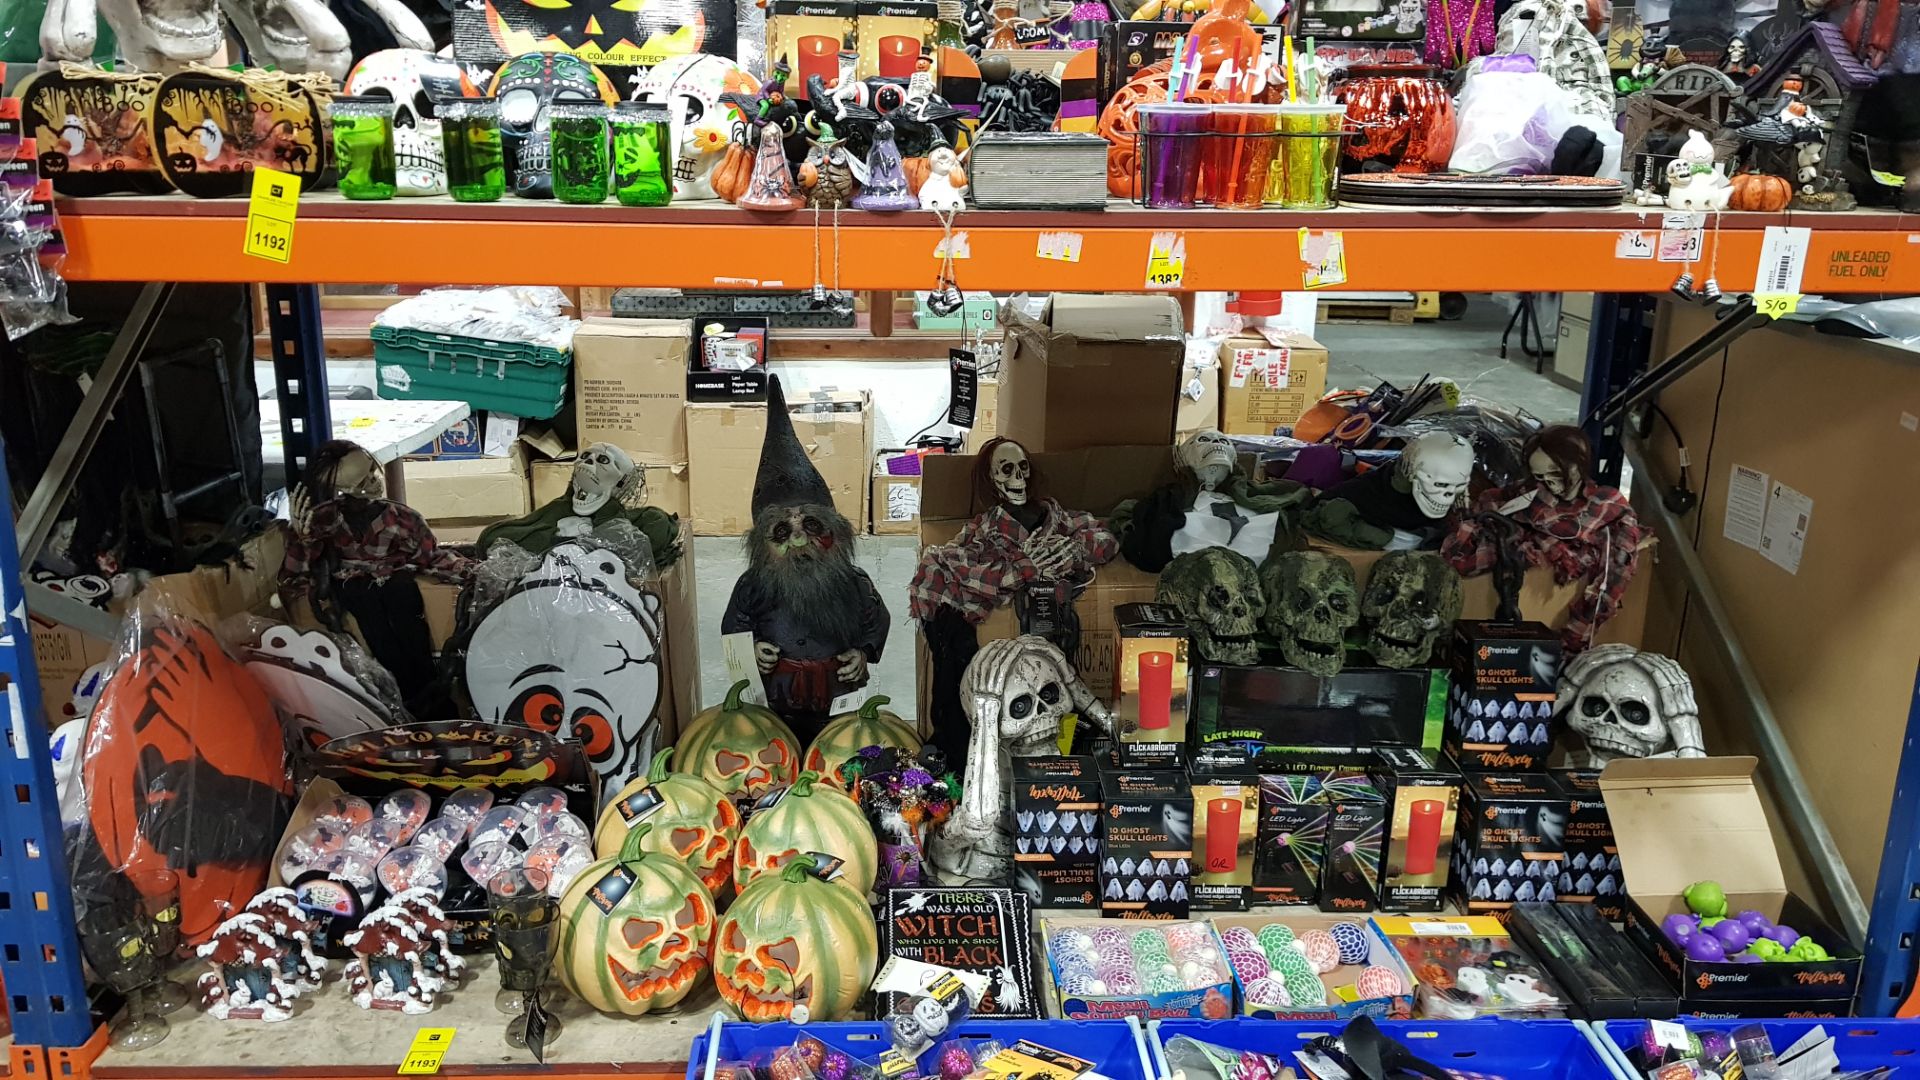 LARGE QUANTITY ASSORTED BRAND NEW PREMIER HALLOWEEN DECORATIONS LOT IE GHOST SKULL LIGHTS, LED LIGHT